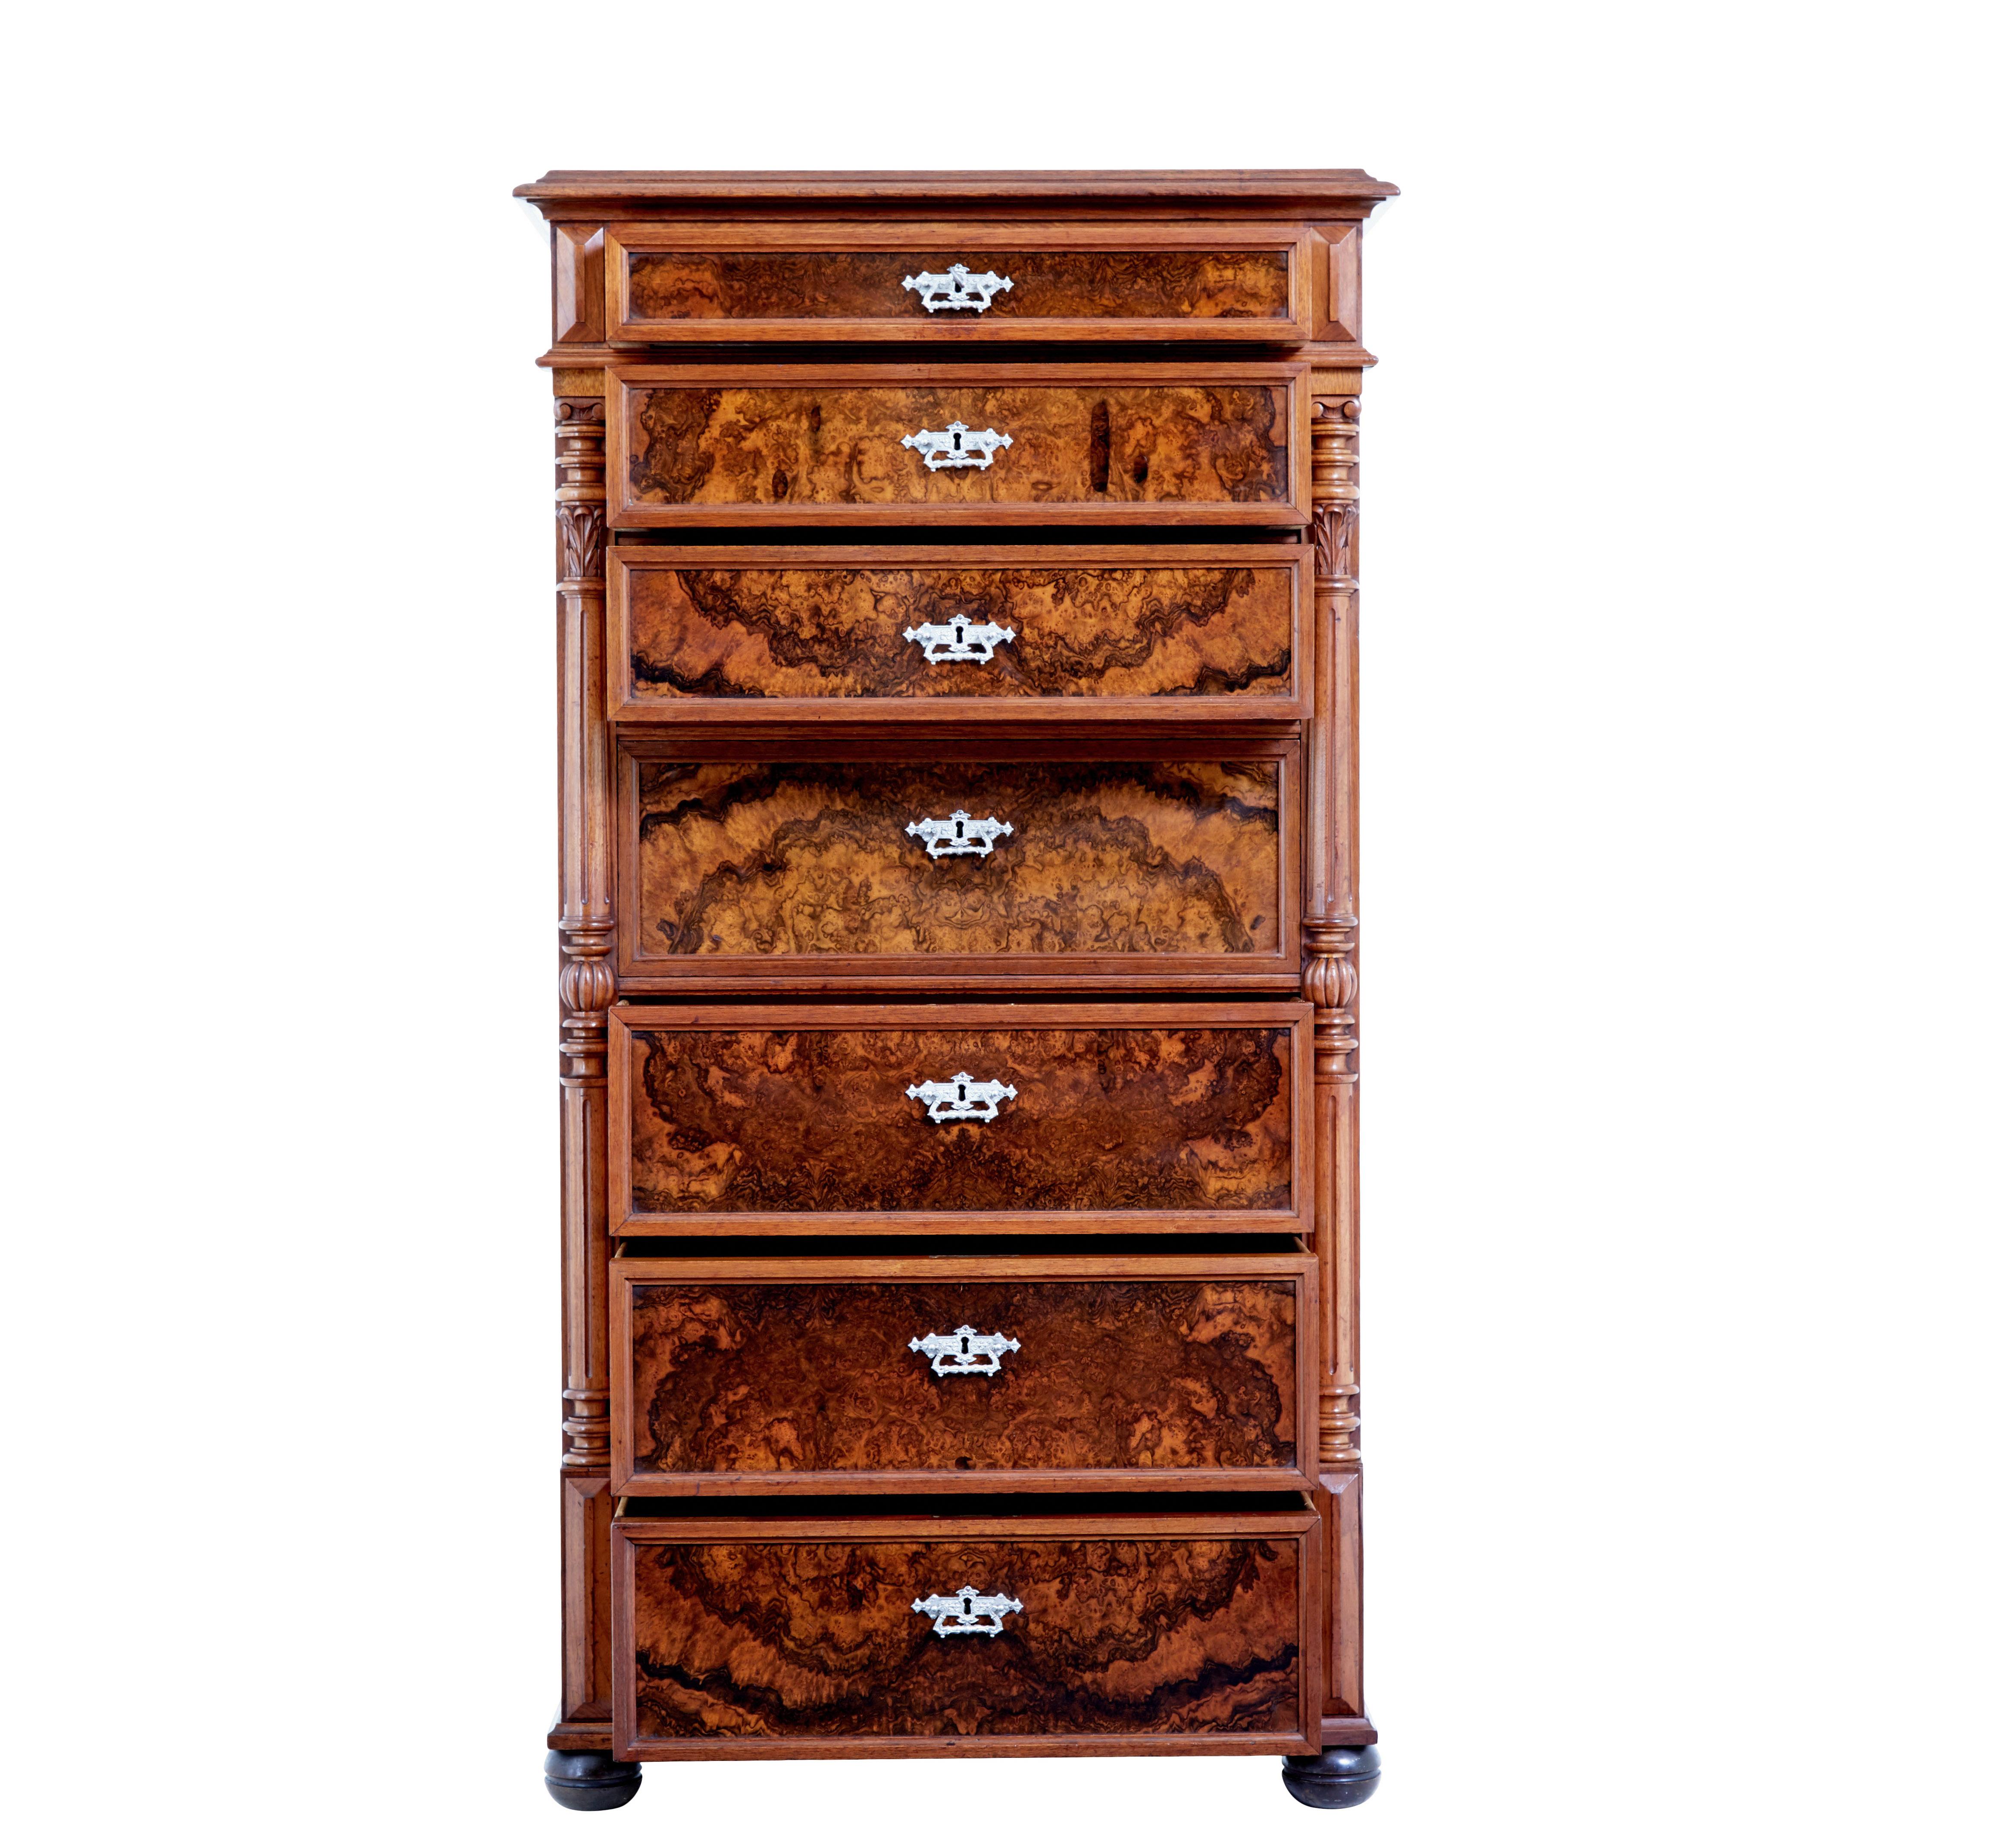 Victorian 19th century burr walnut secretaire tall chest of drawers For Sale